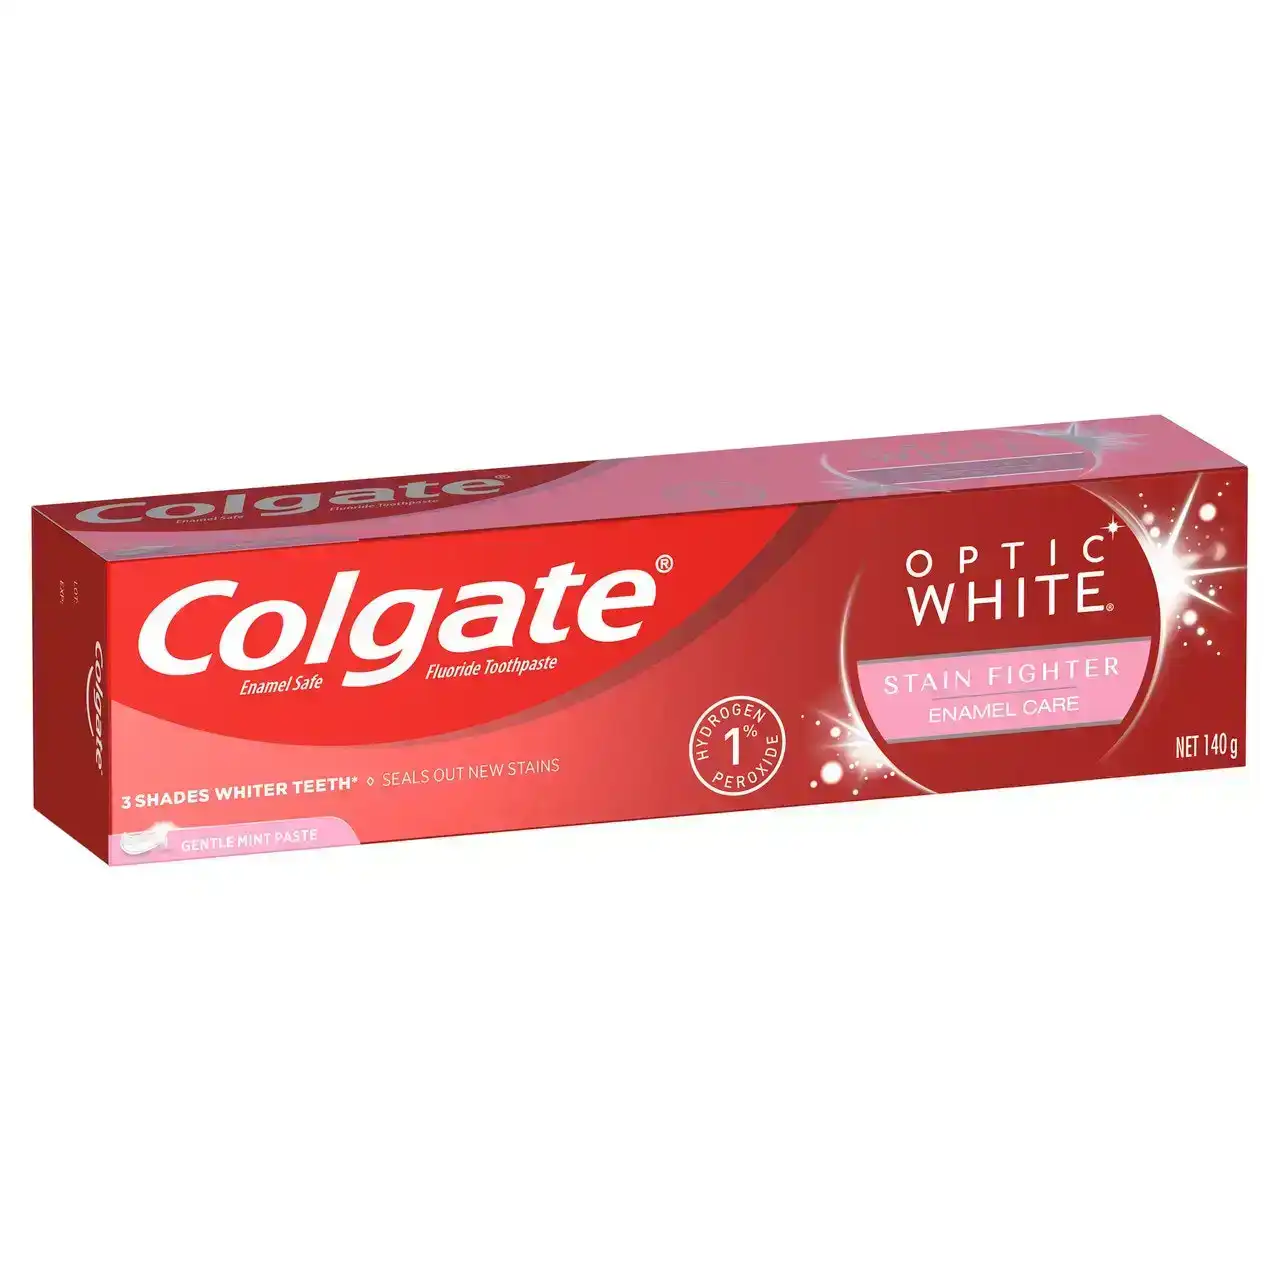 Colgate Optic White Stain Fighter Teeth Whitening Toothpaste 140g, Enamel Care, with 1% Hydrogen Peroxide